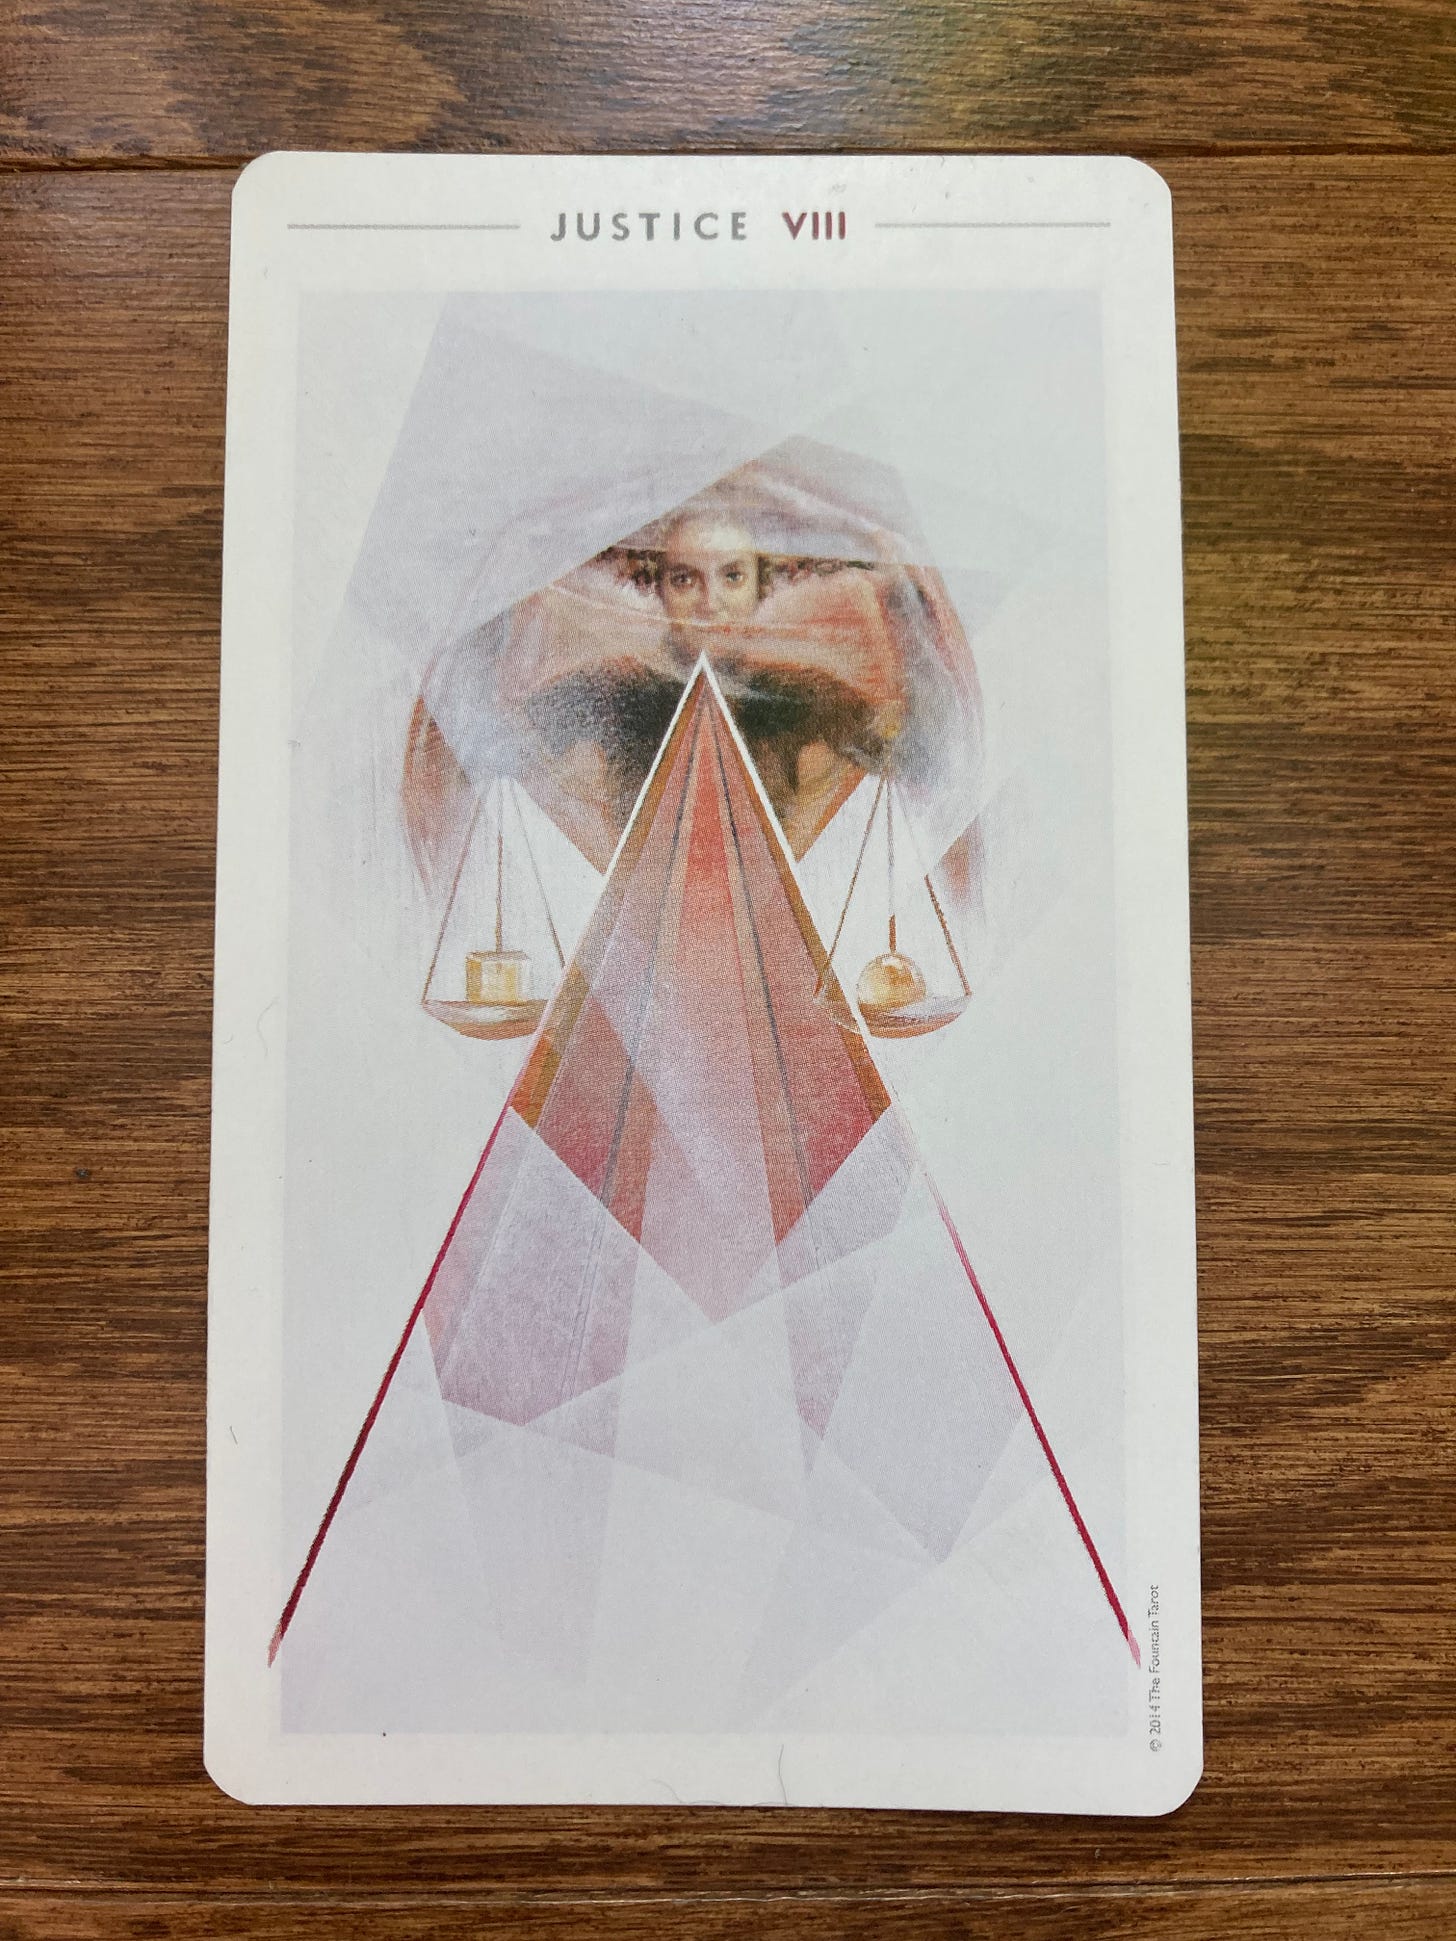 The JUSTICE tarot card lies on a wooden background. The card depicts a woman of color looking at the viewer and holding the scales of justice in front of her